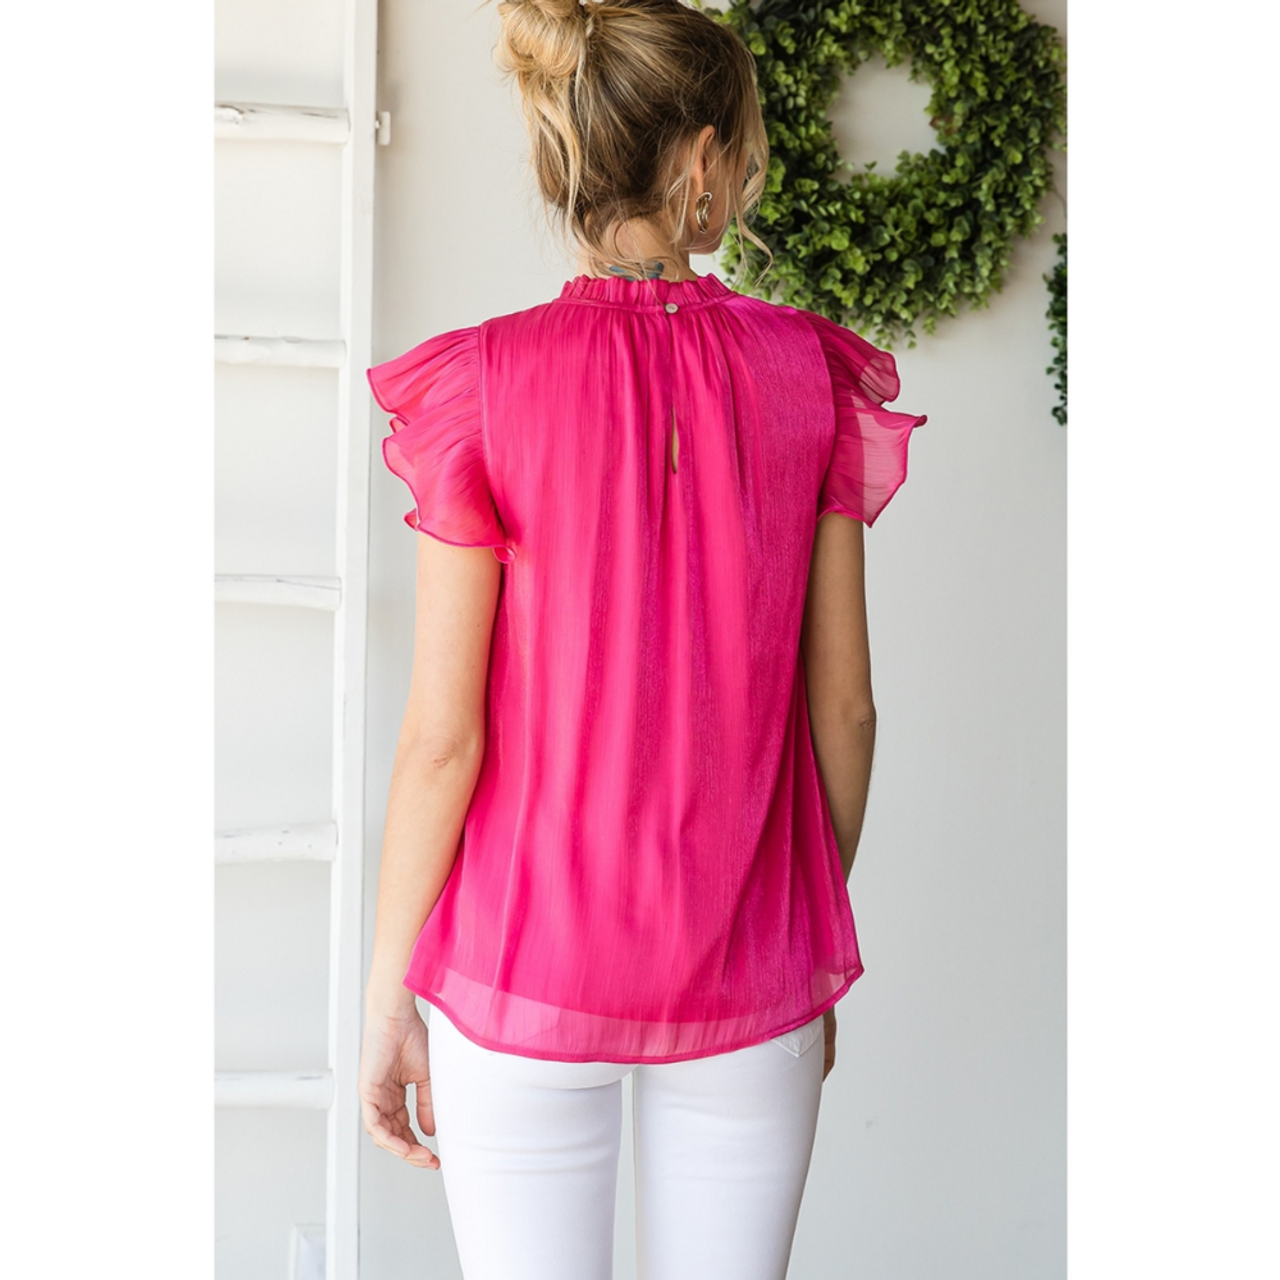 Jodifl Solid top with a frill mock neckline and ruffle cap sleeves Pink